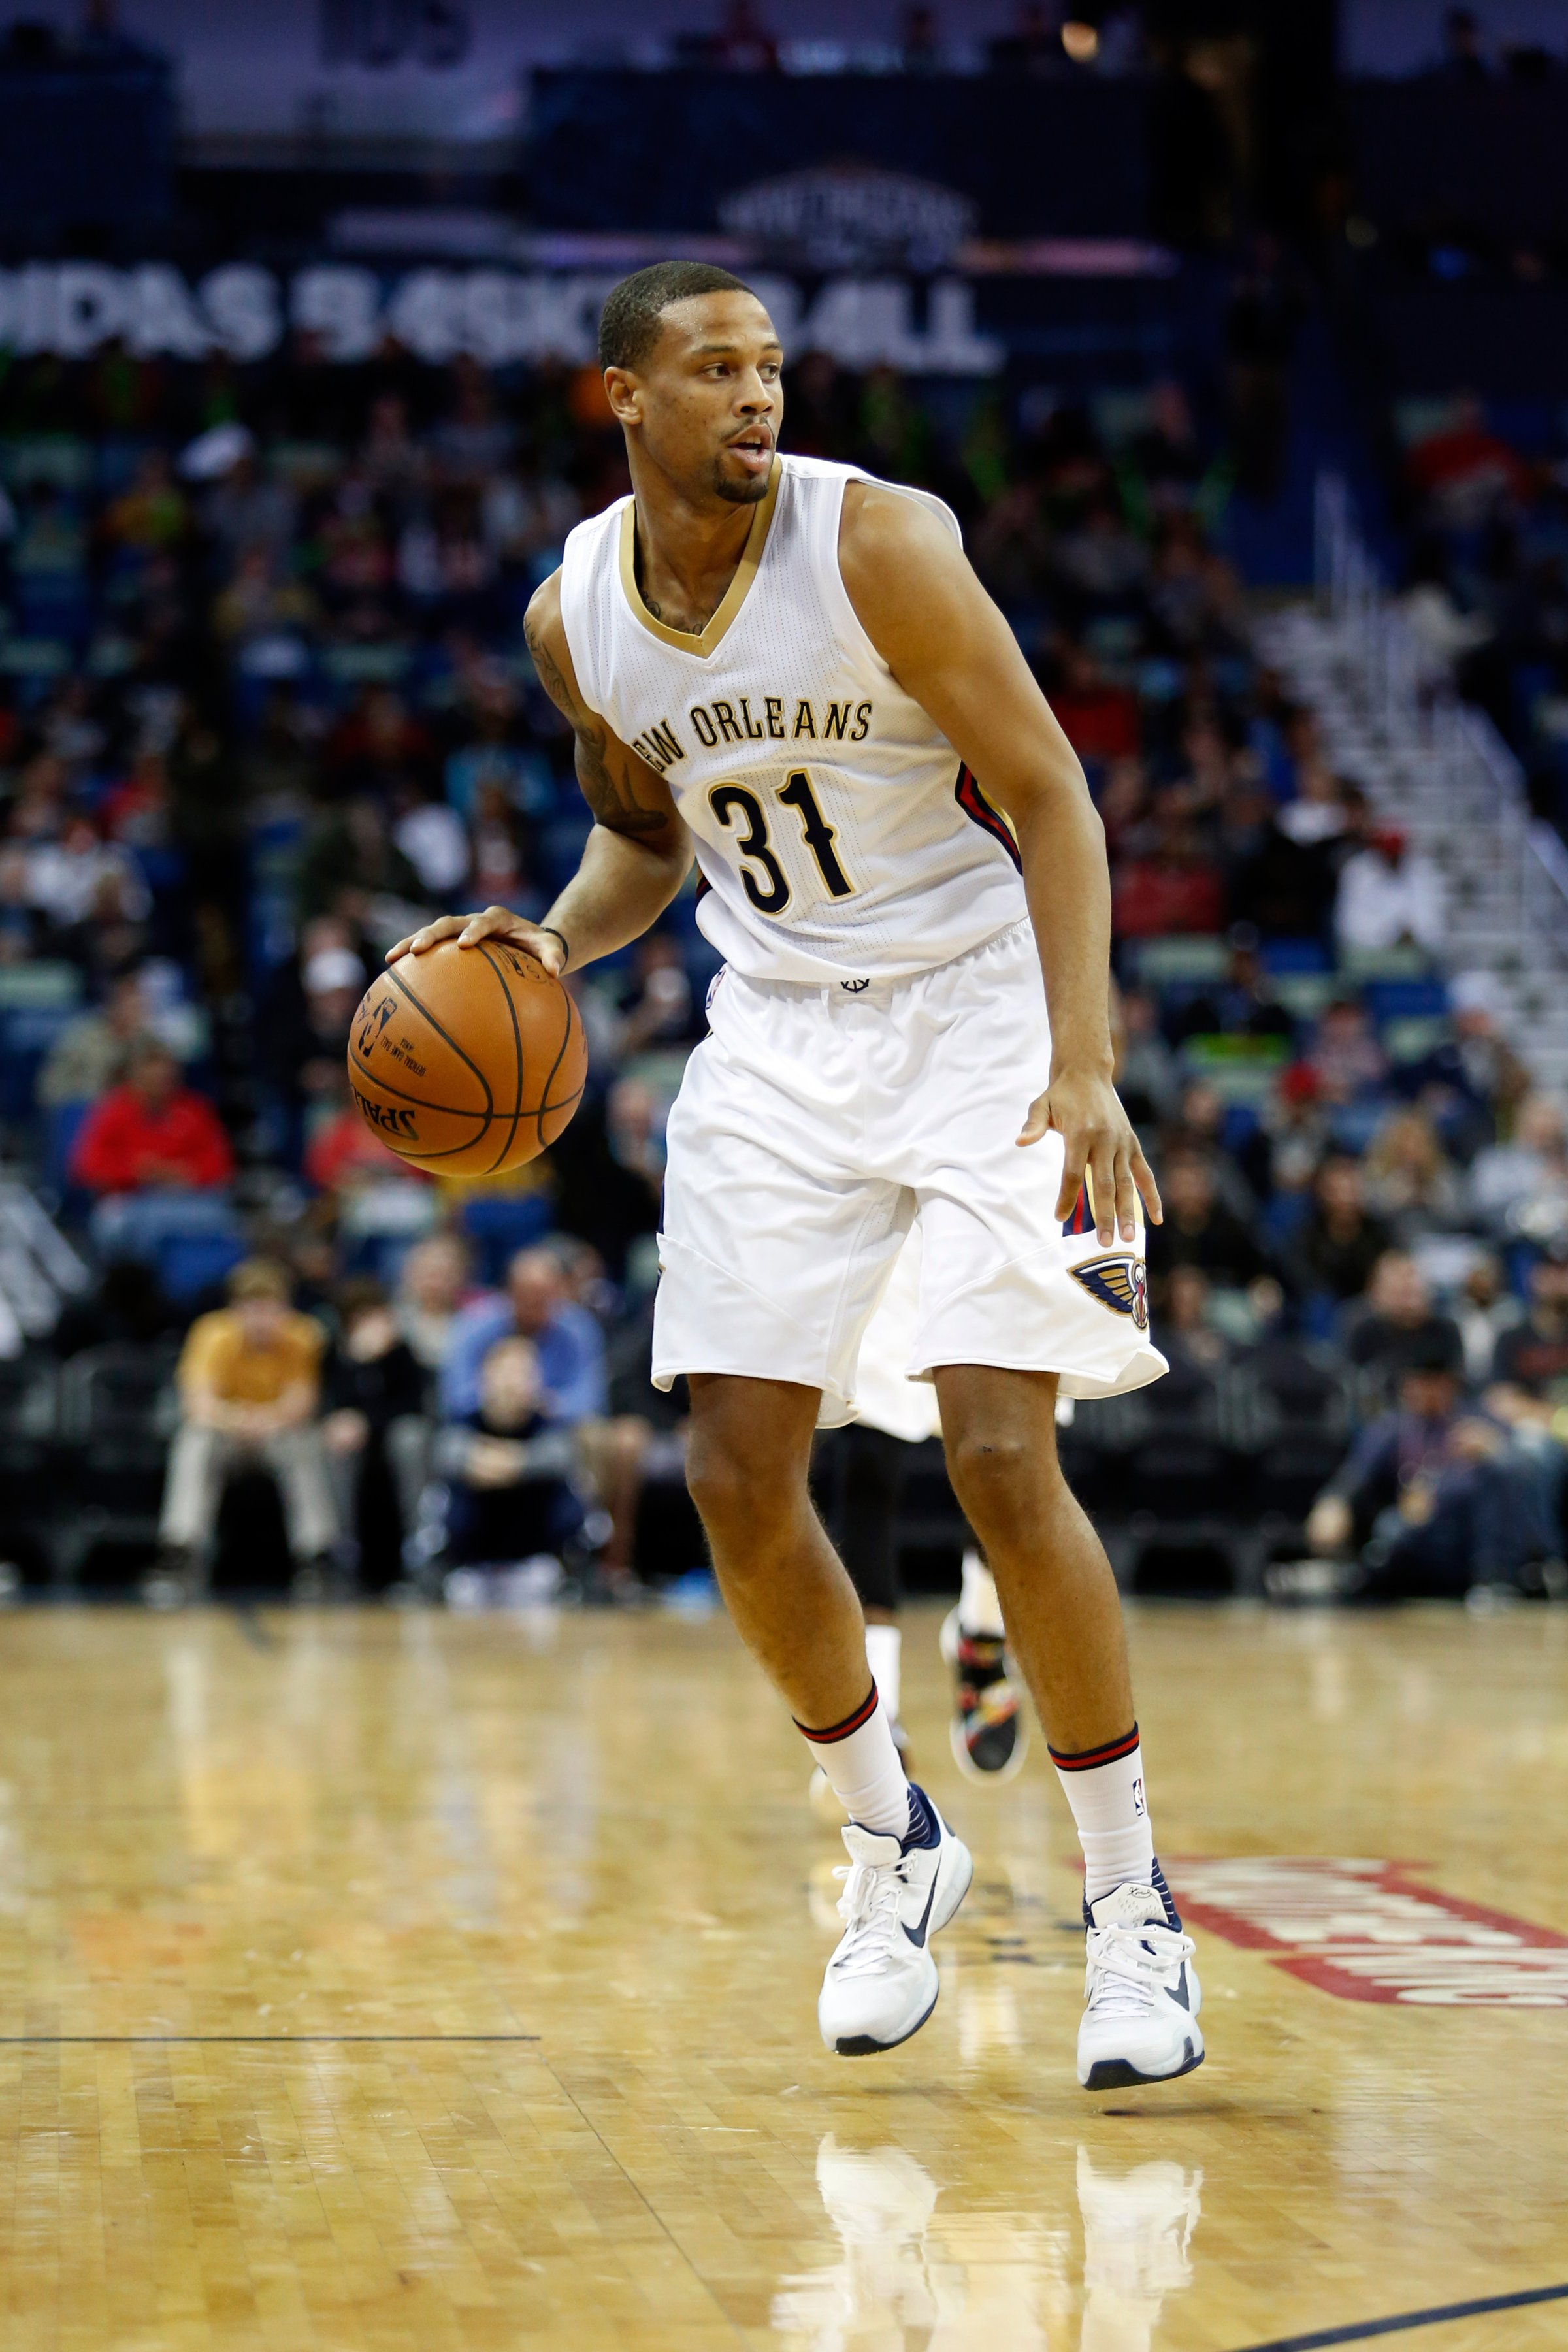 New Orleans Pelicans guard Bryce Dejean-Jones (31) during the first half of an NBA basketball game against the Utah Jazz in New Orleans, Wednesday, Feb. 10, 2016. (AP Photo/Tyler Kaufman)